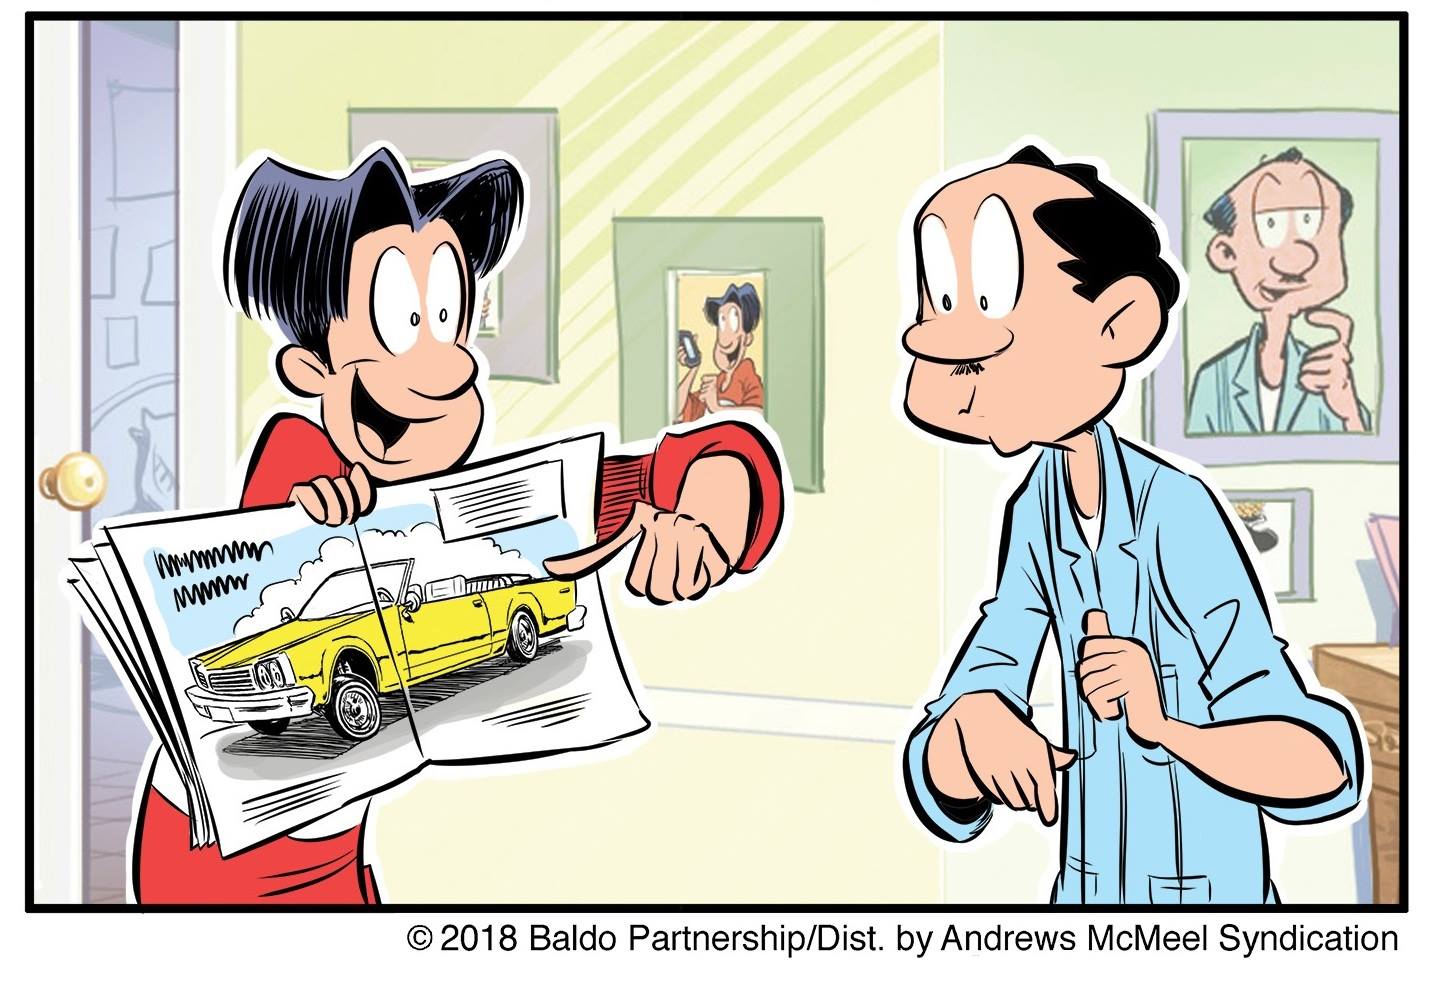 Writer Hector Cantú is co-creator of the comic strip "Baldo." The strip was the first to center on a Latino teen and his family.